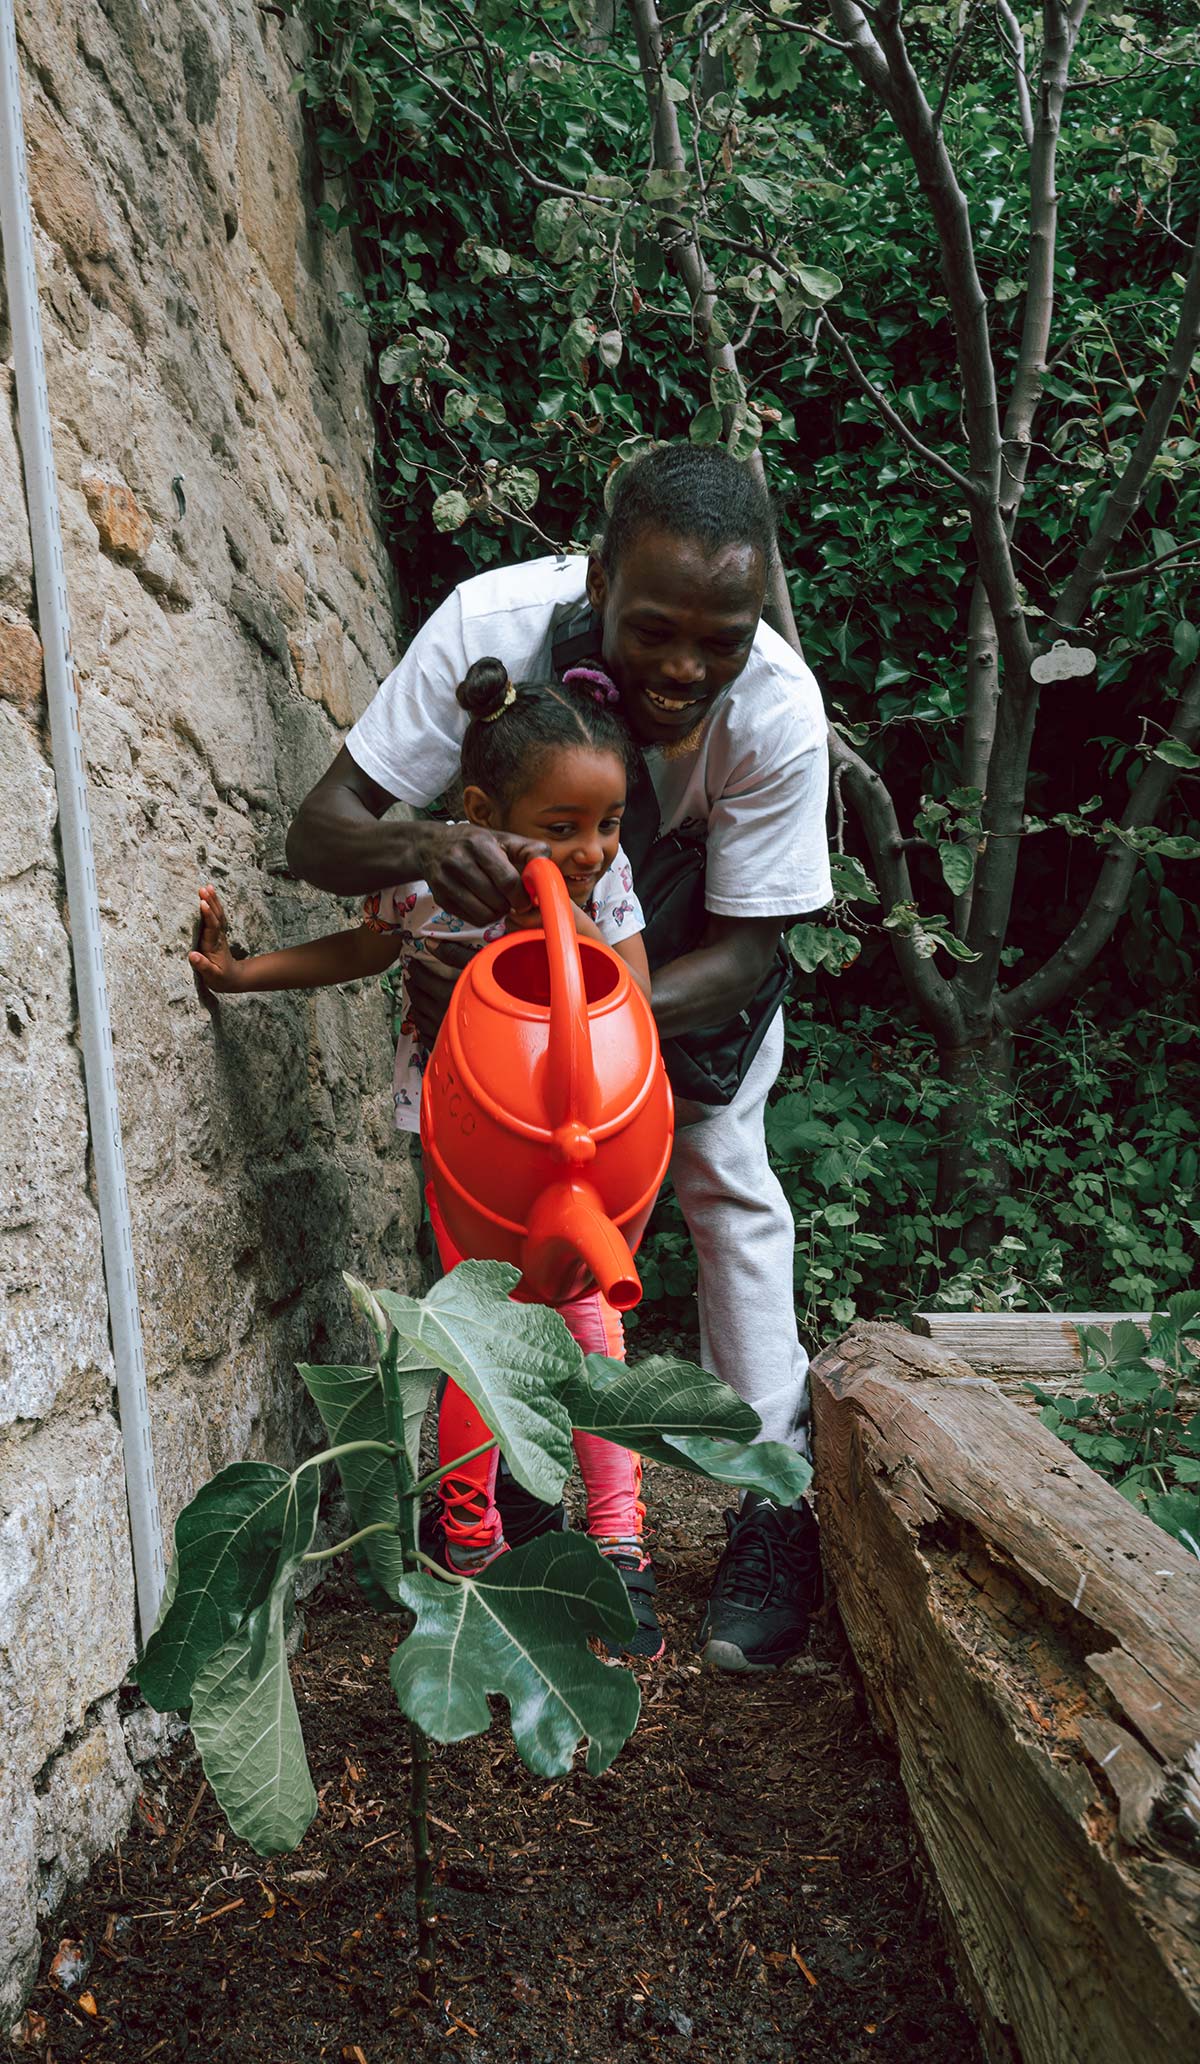 A man and a child watering a young tree.